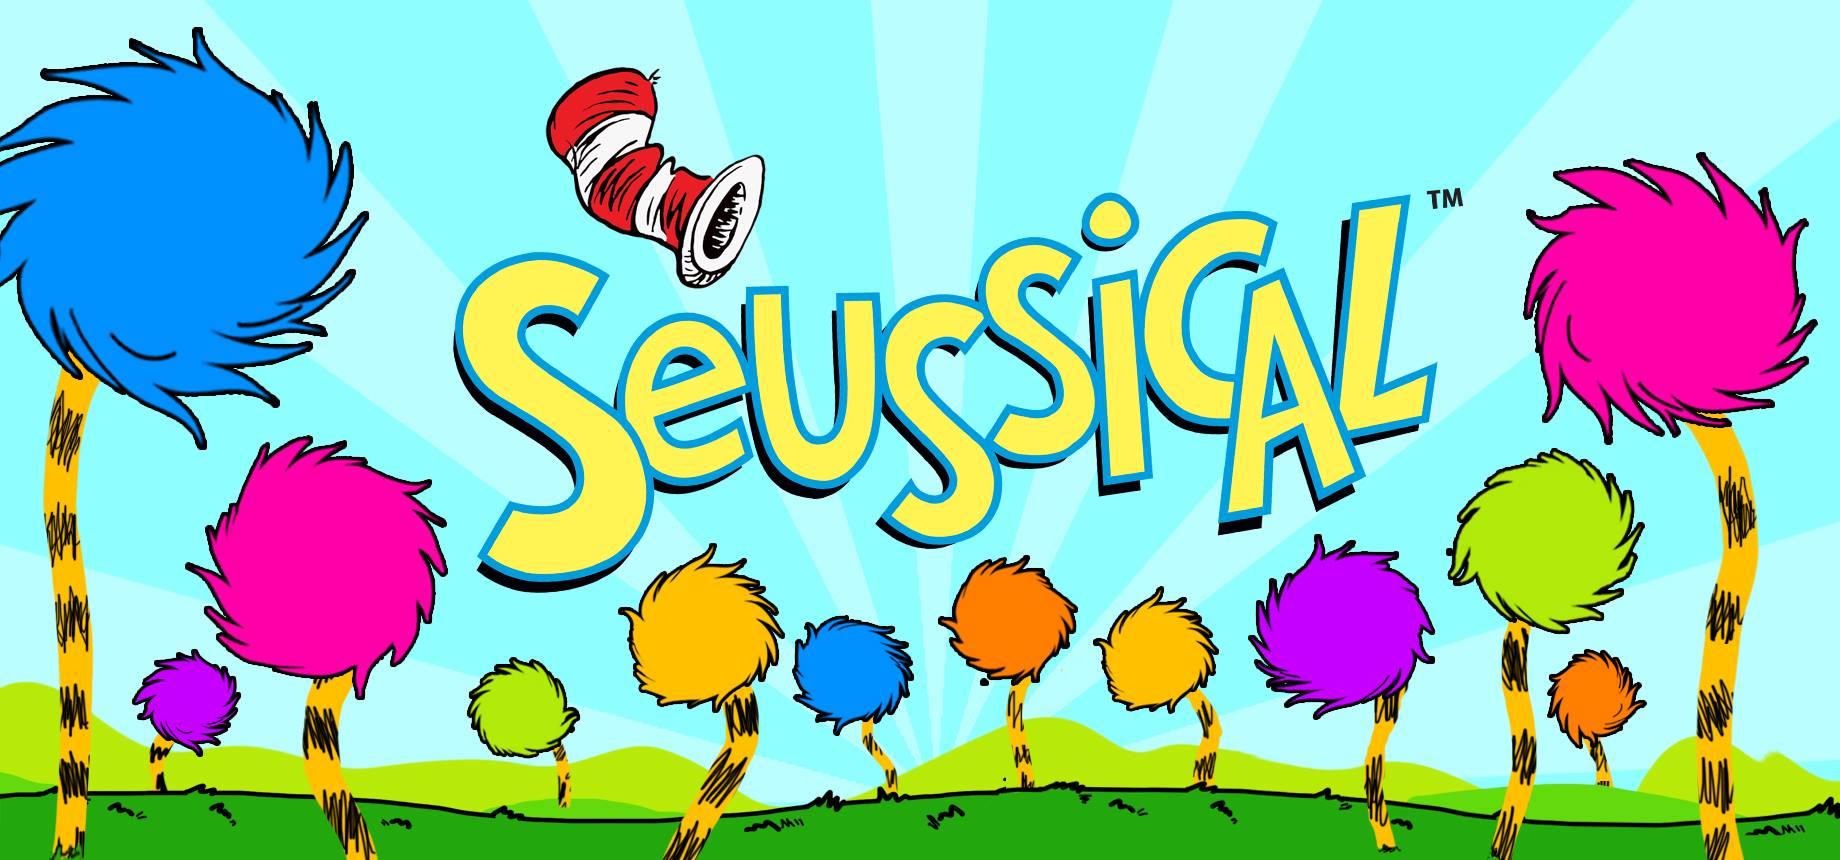 Seussical, the musical by Central Texas Theatre Academy